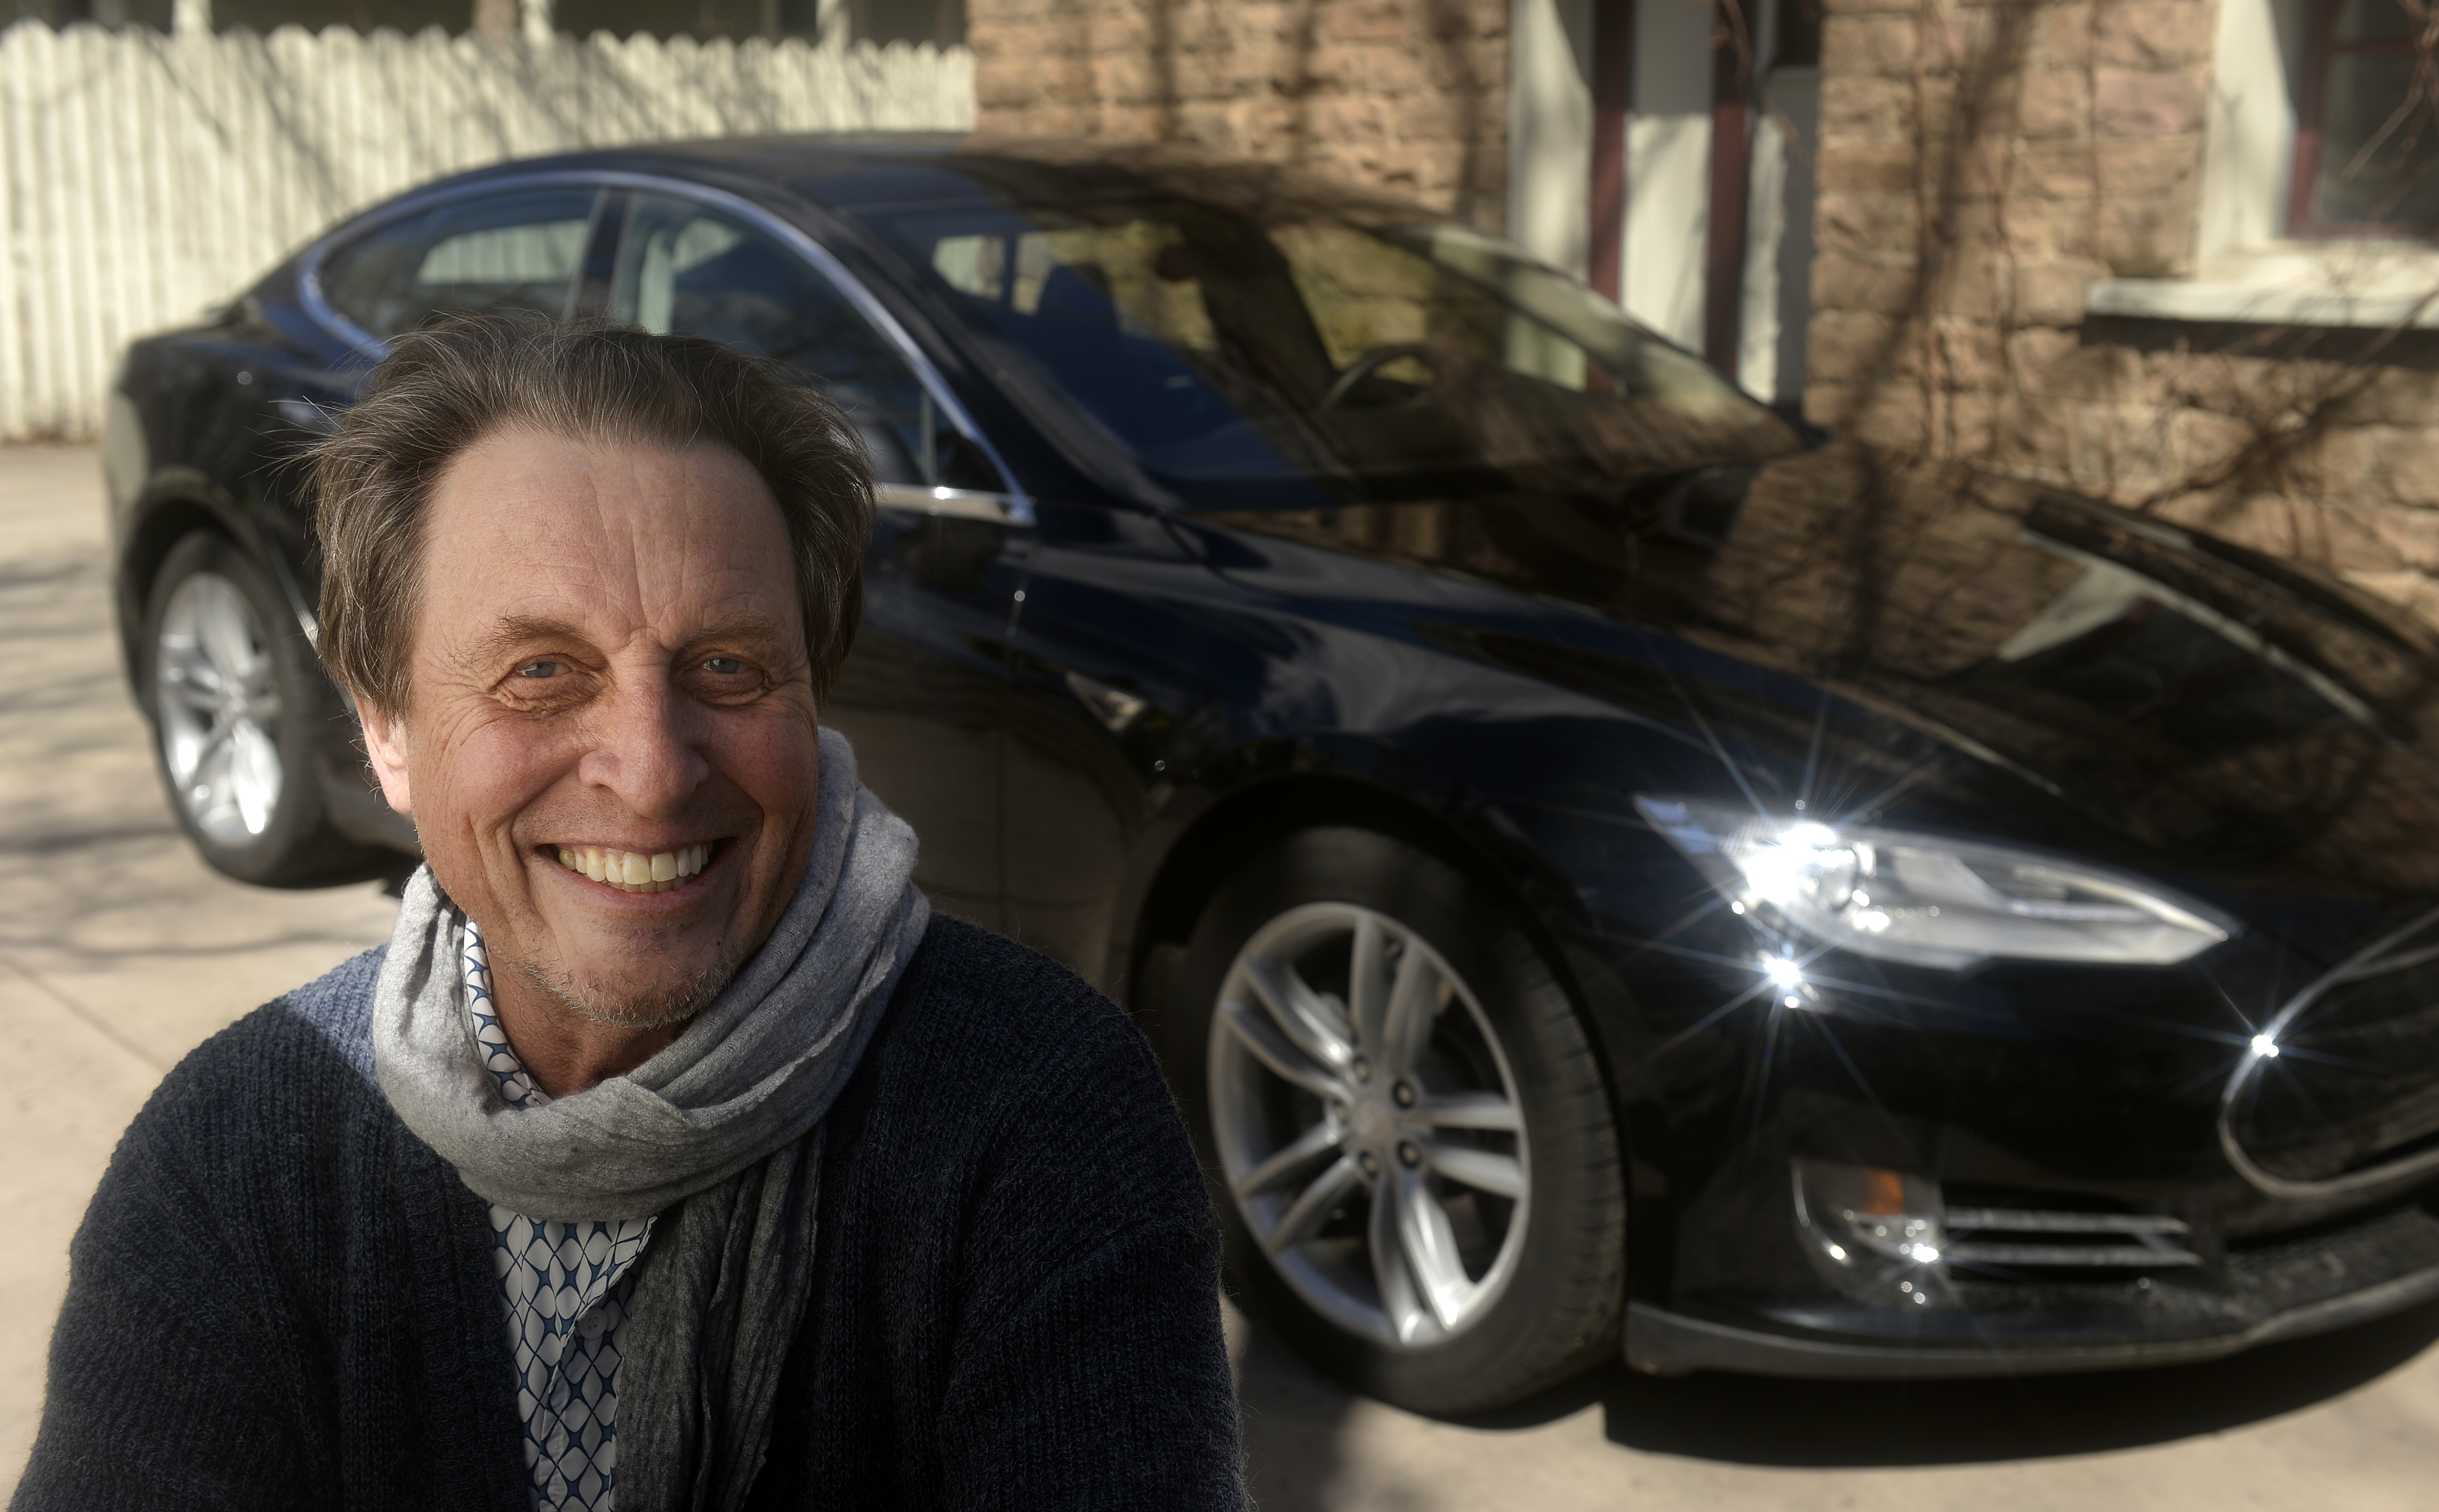 South African Errol Musk who the father of billionaire entrepreneur Elon Musk. In the background is a Tesla Model S.